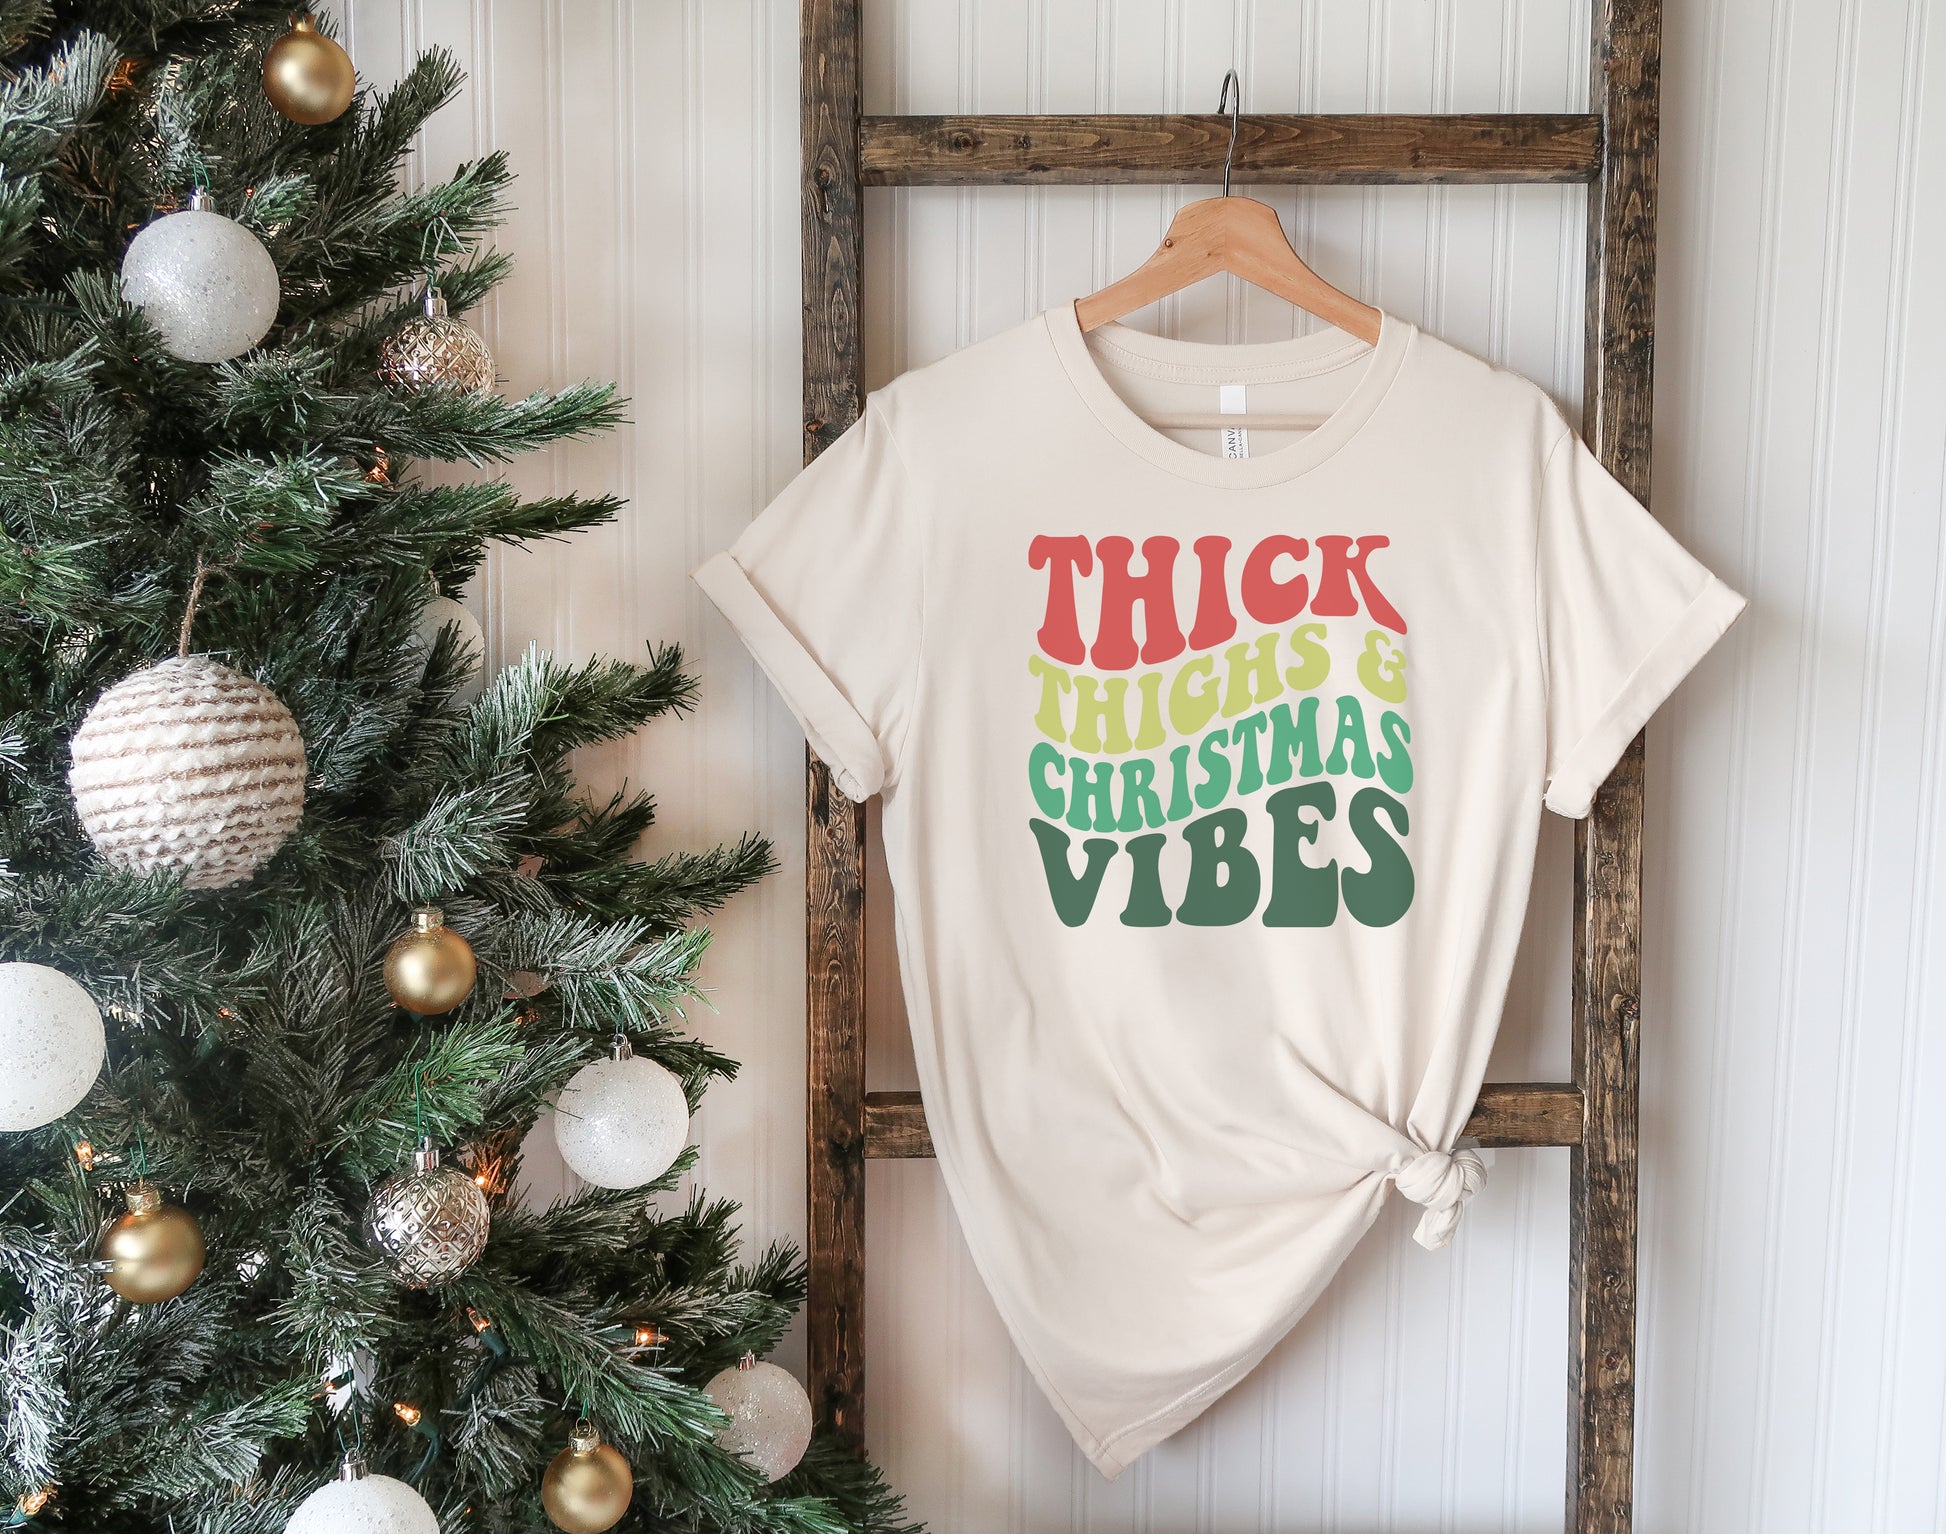 Thick Thighs and Christmas Vibes Shirt